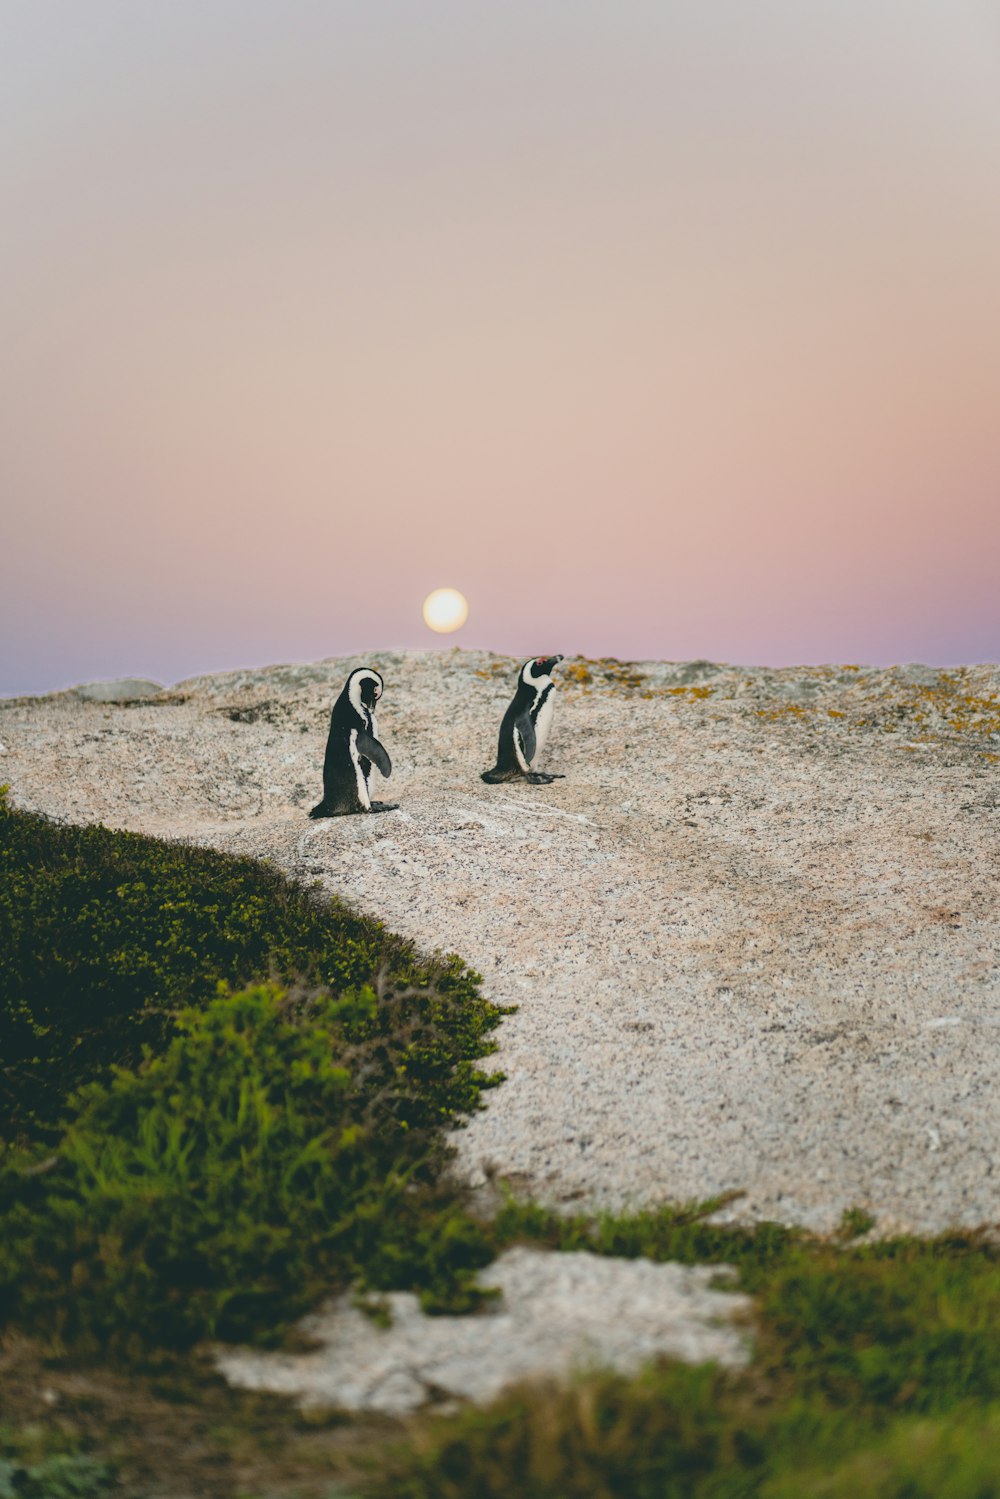 two penguin walking at the shore during daytime